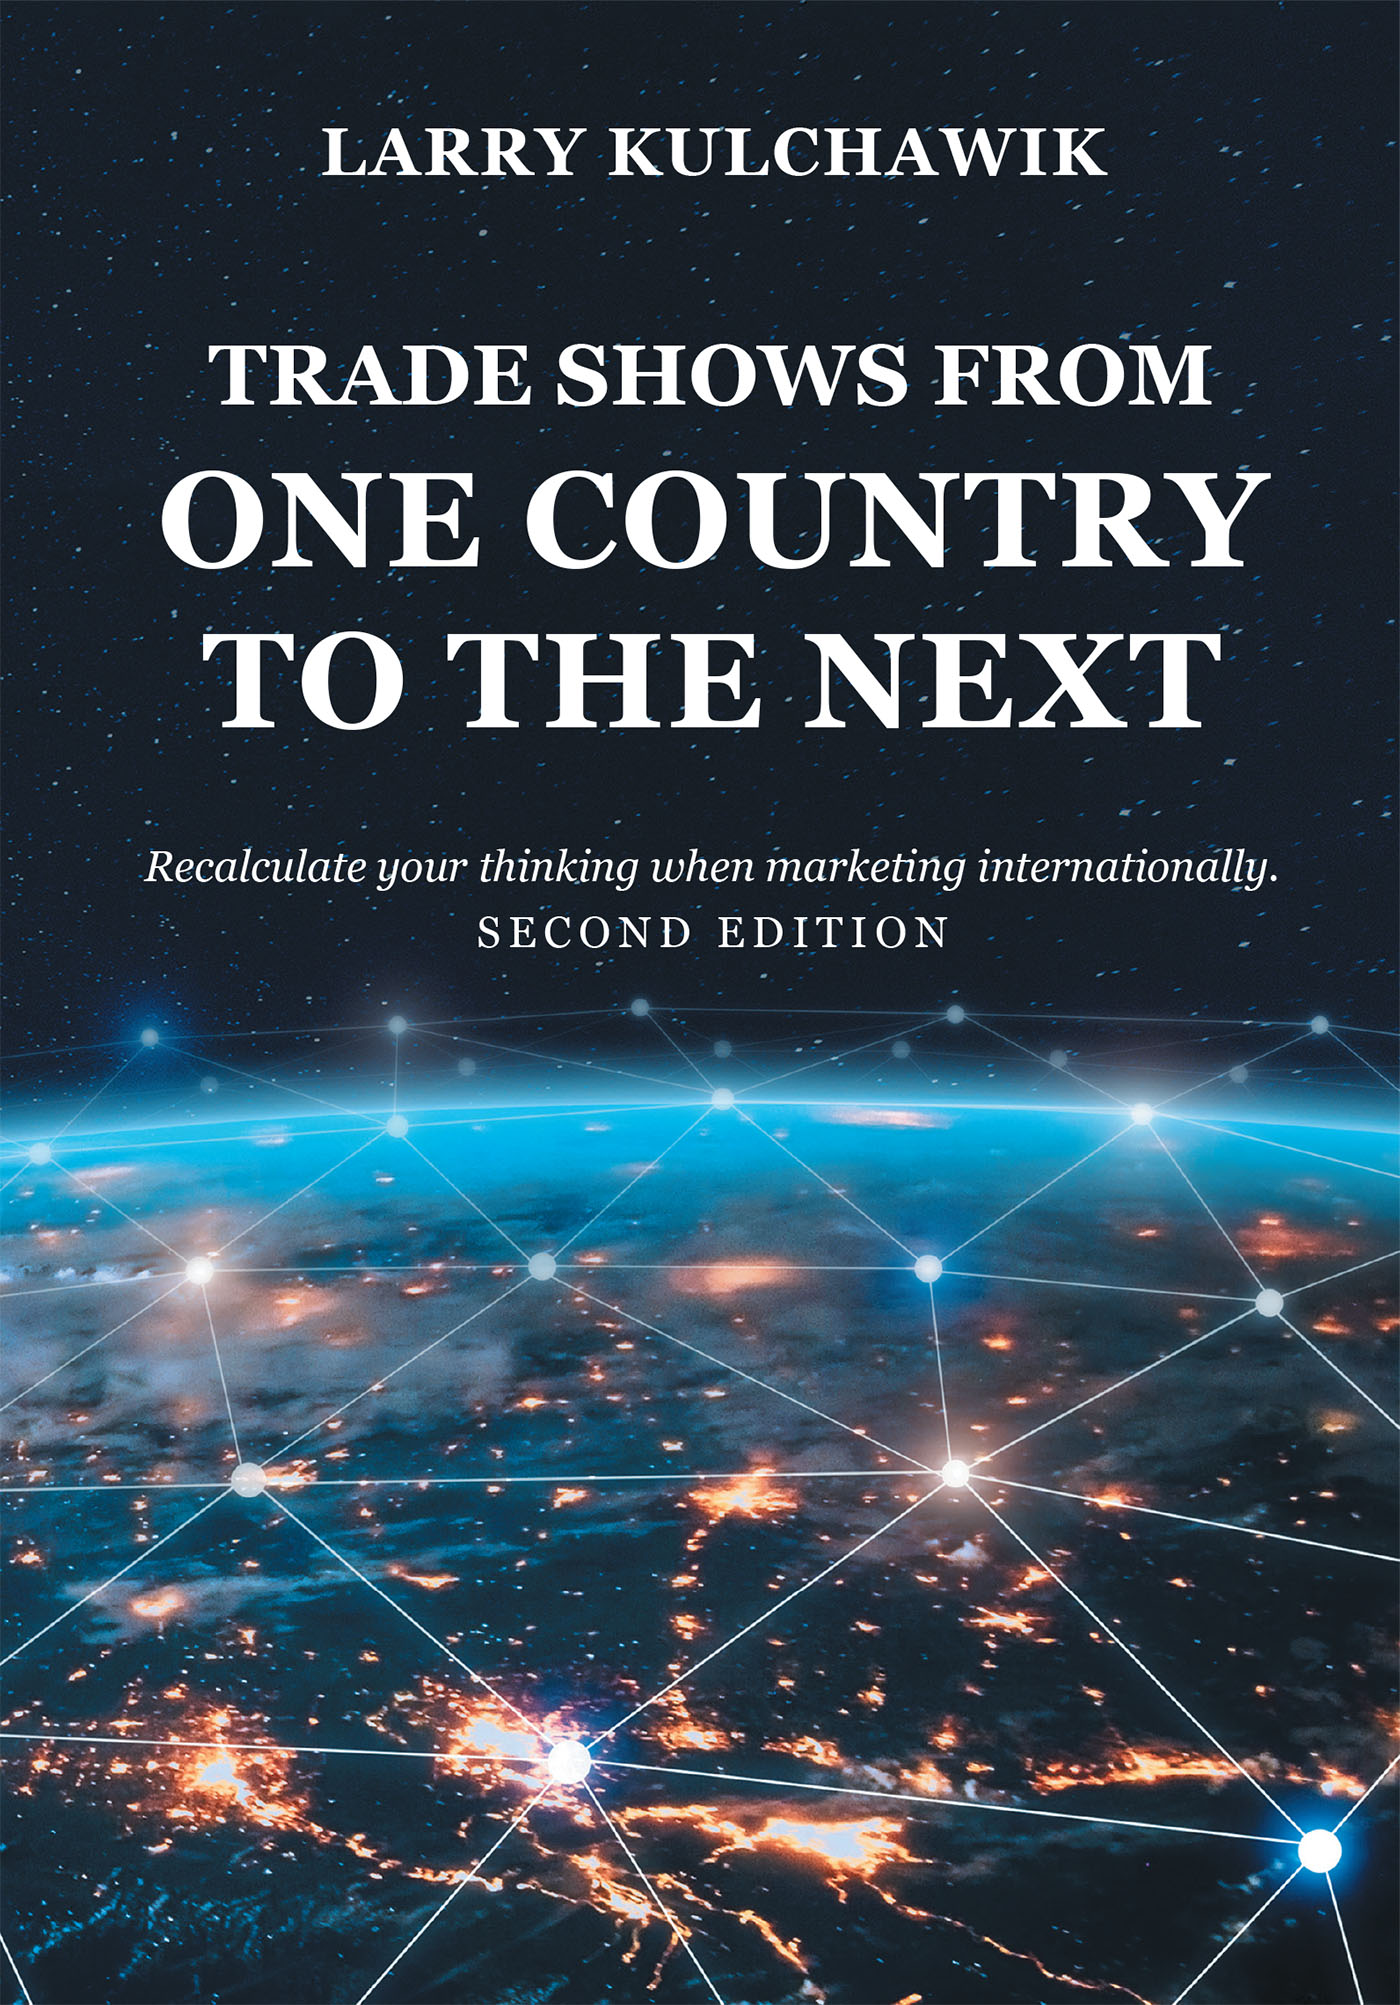 Larry Kulchawik's Book 'Trade Shows From One Country to the Next' is a